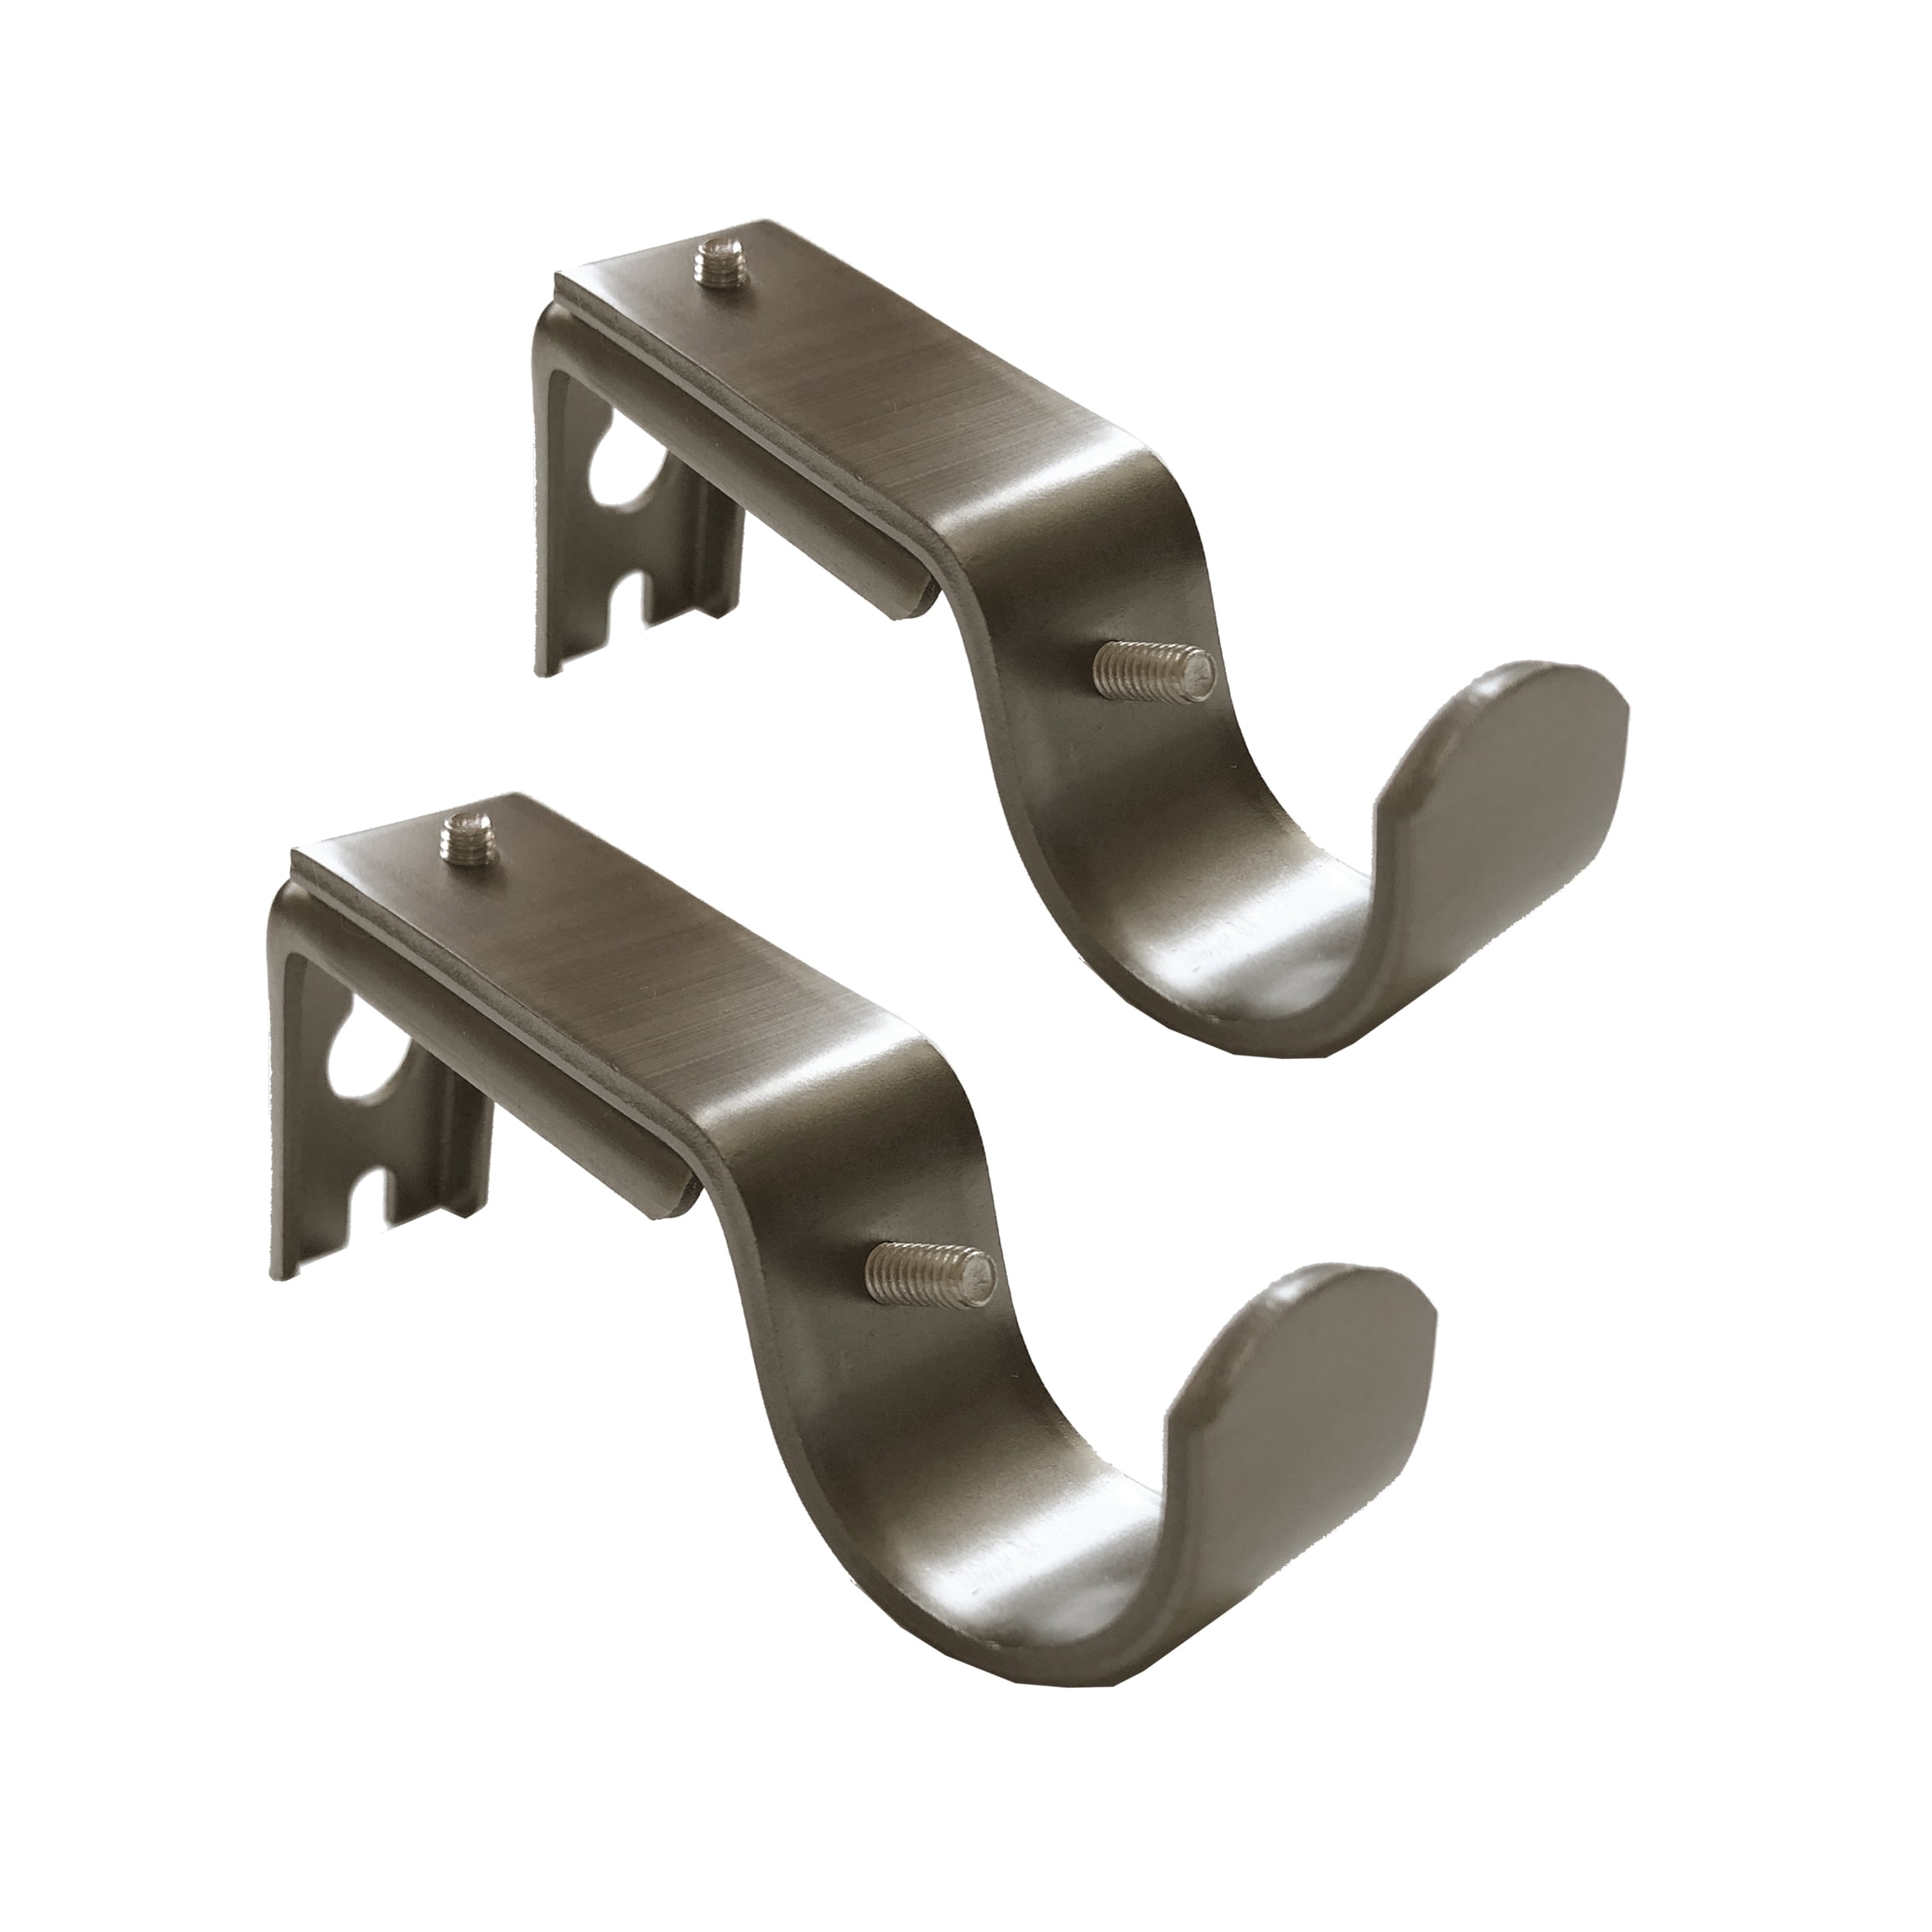 1 Pair Window Shade LOCKING OUTSIDE MOUNT Extension BRACKETS for Metal Rollers! 